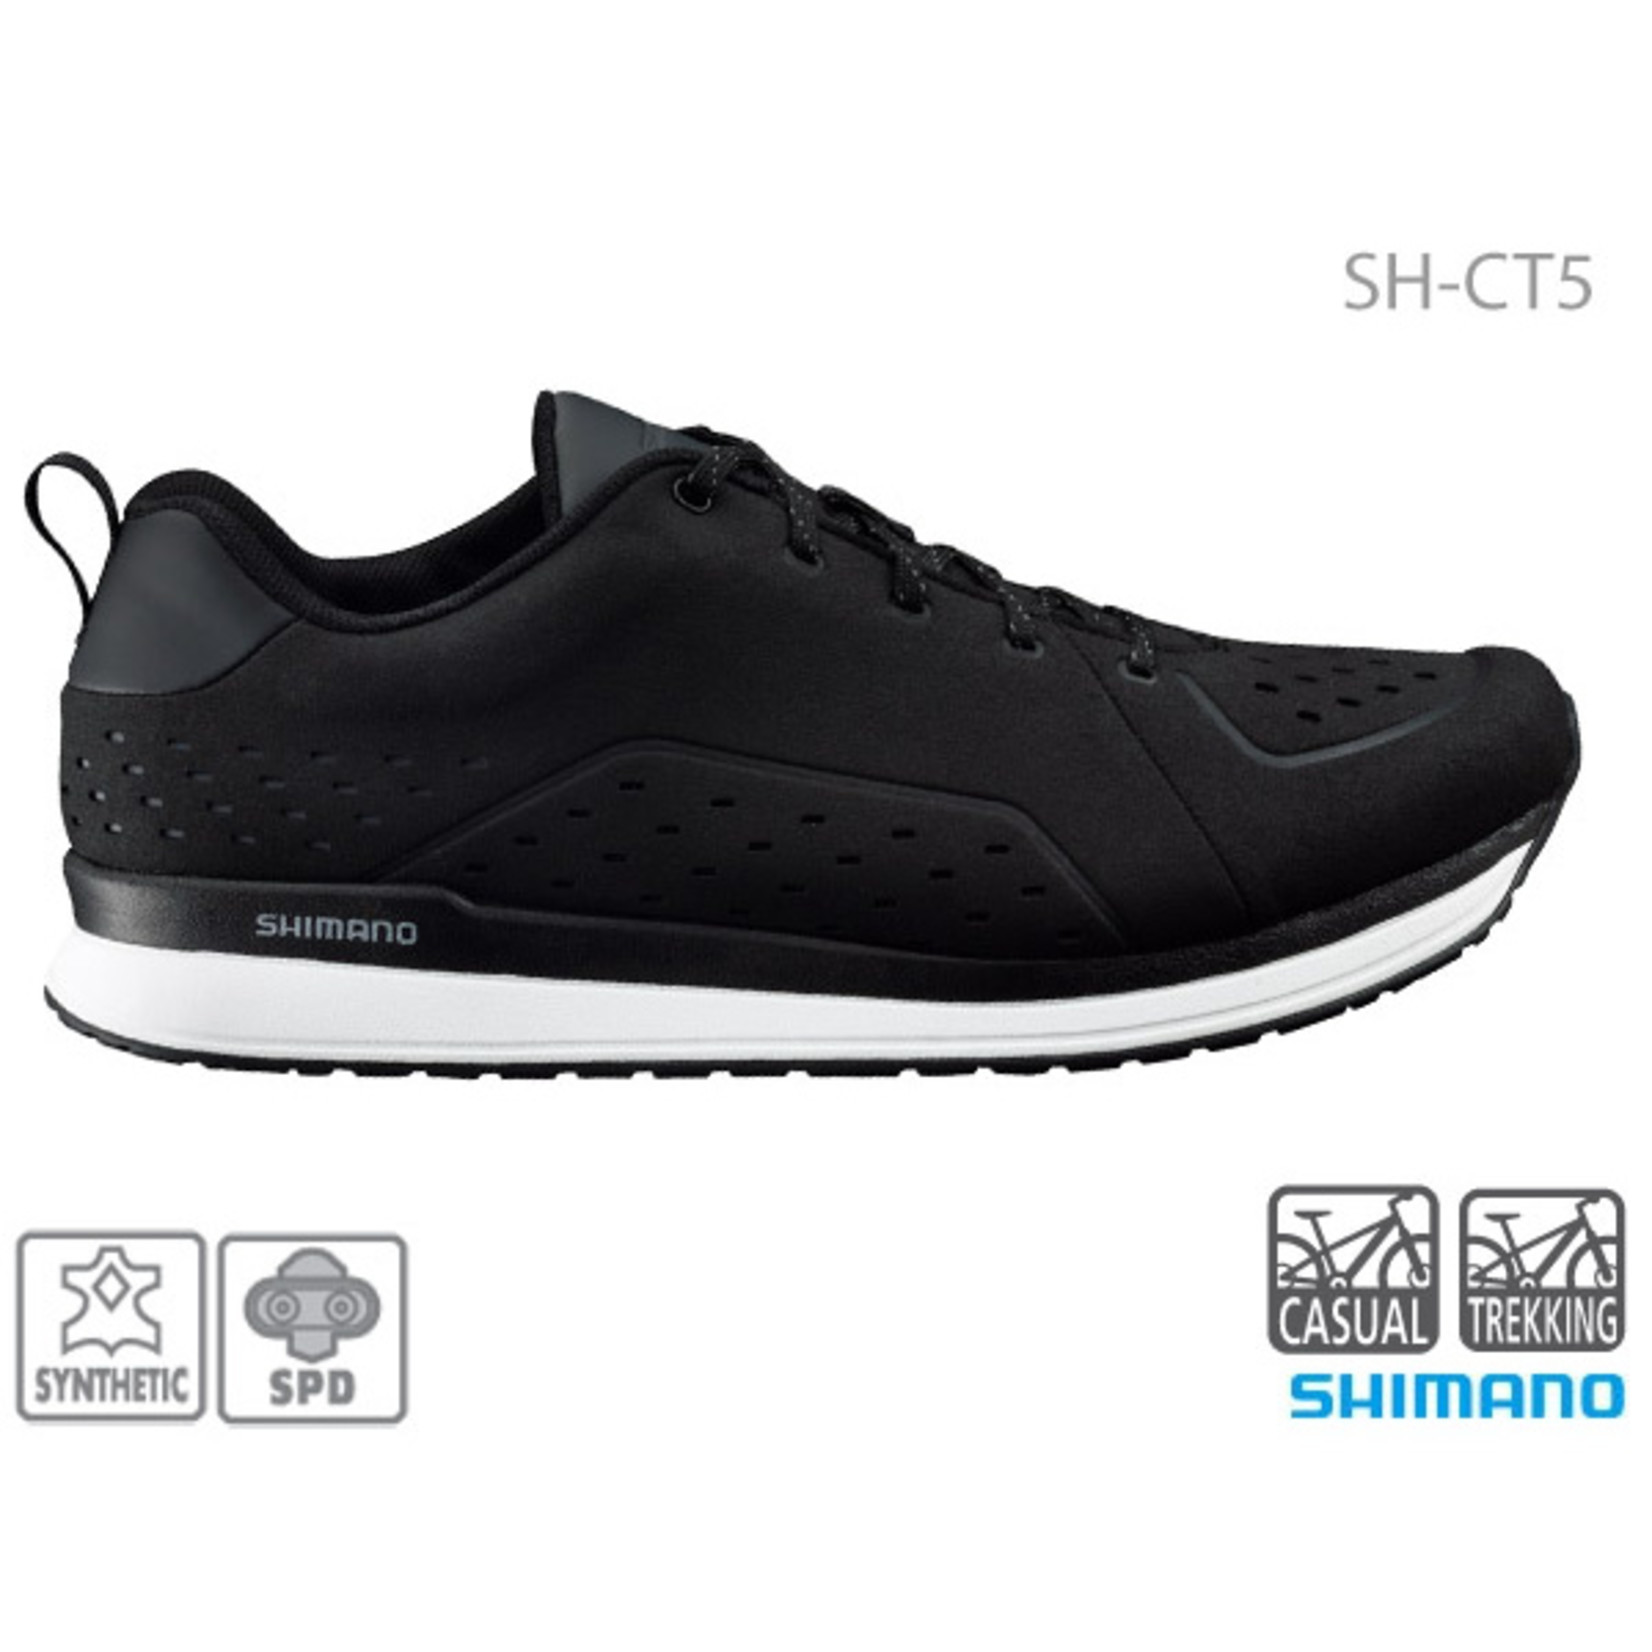 Shimano Shimano SH-CT500 SPD Comfort Shoes Synthetic- Black Easy Cleat Installation